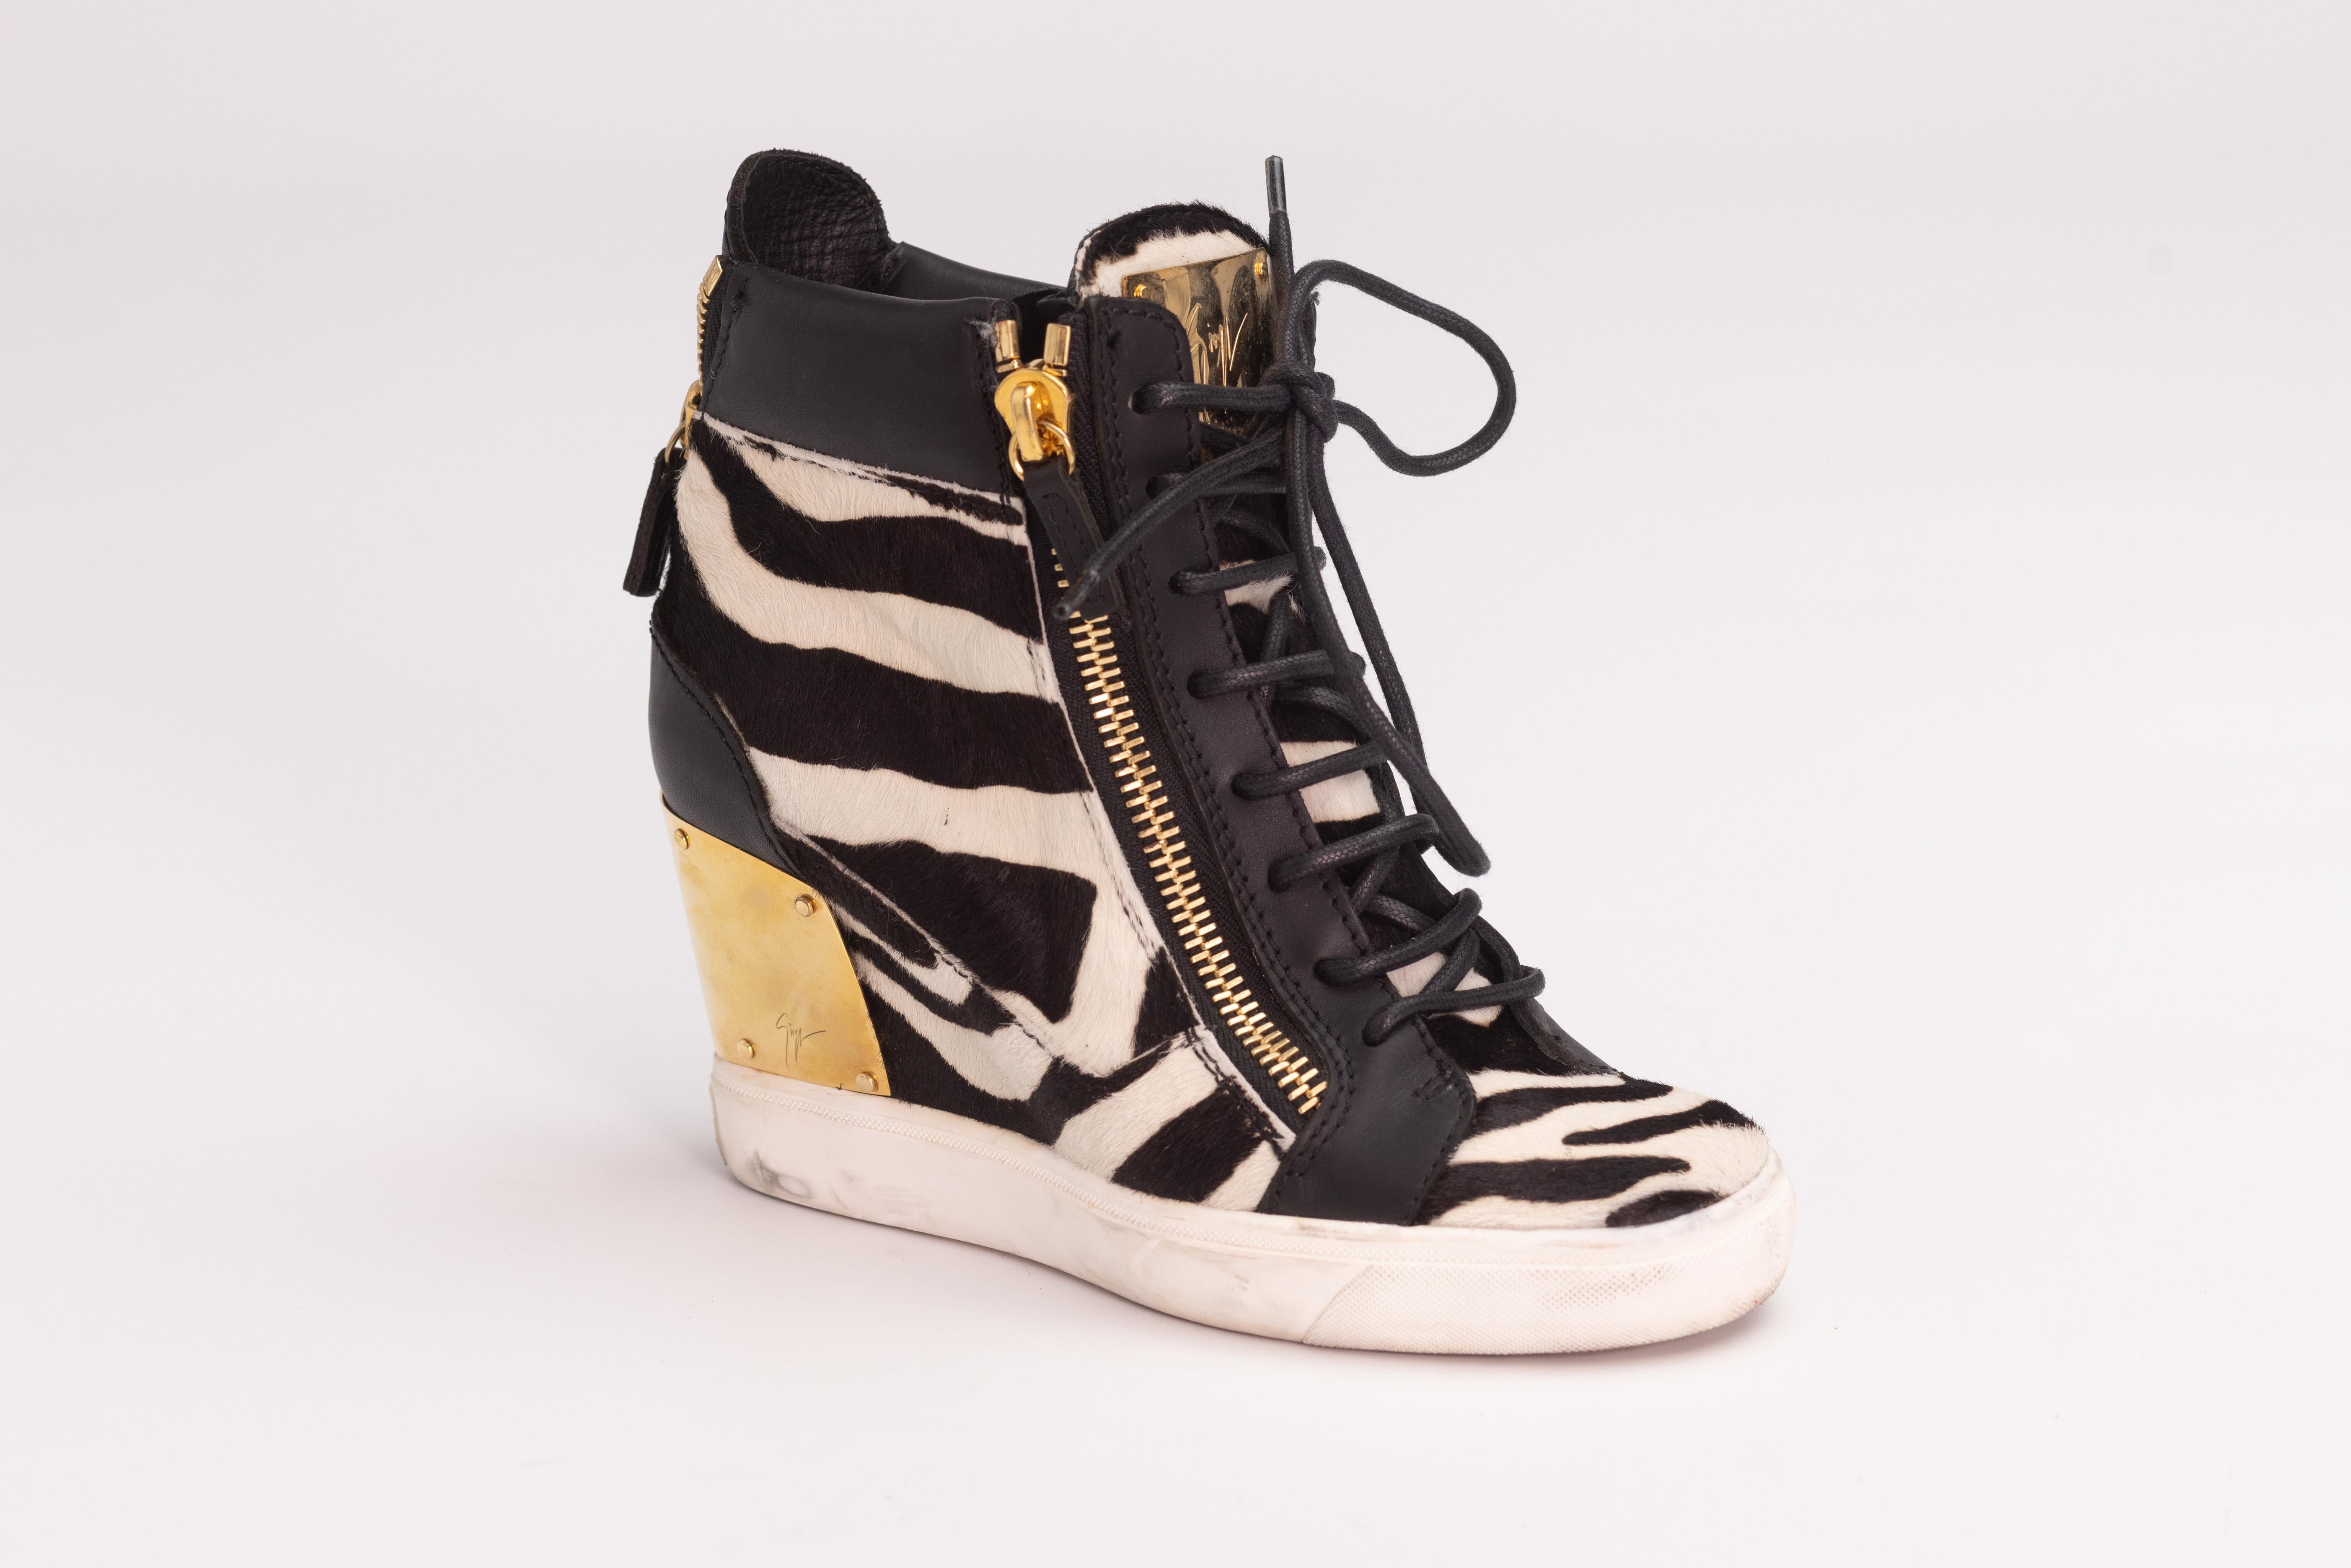 Color: Black and white zebra print with gold detail on heel
Material: Leather , calf hair and metal plate at heel
Size: 36 EU / 5 US
Wedge Height: 75 mm / 3”
Condition: Good. Scratches to the plate. Dislocation and makes throughout. 
Comes with: